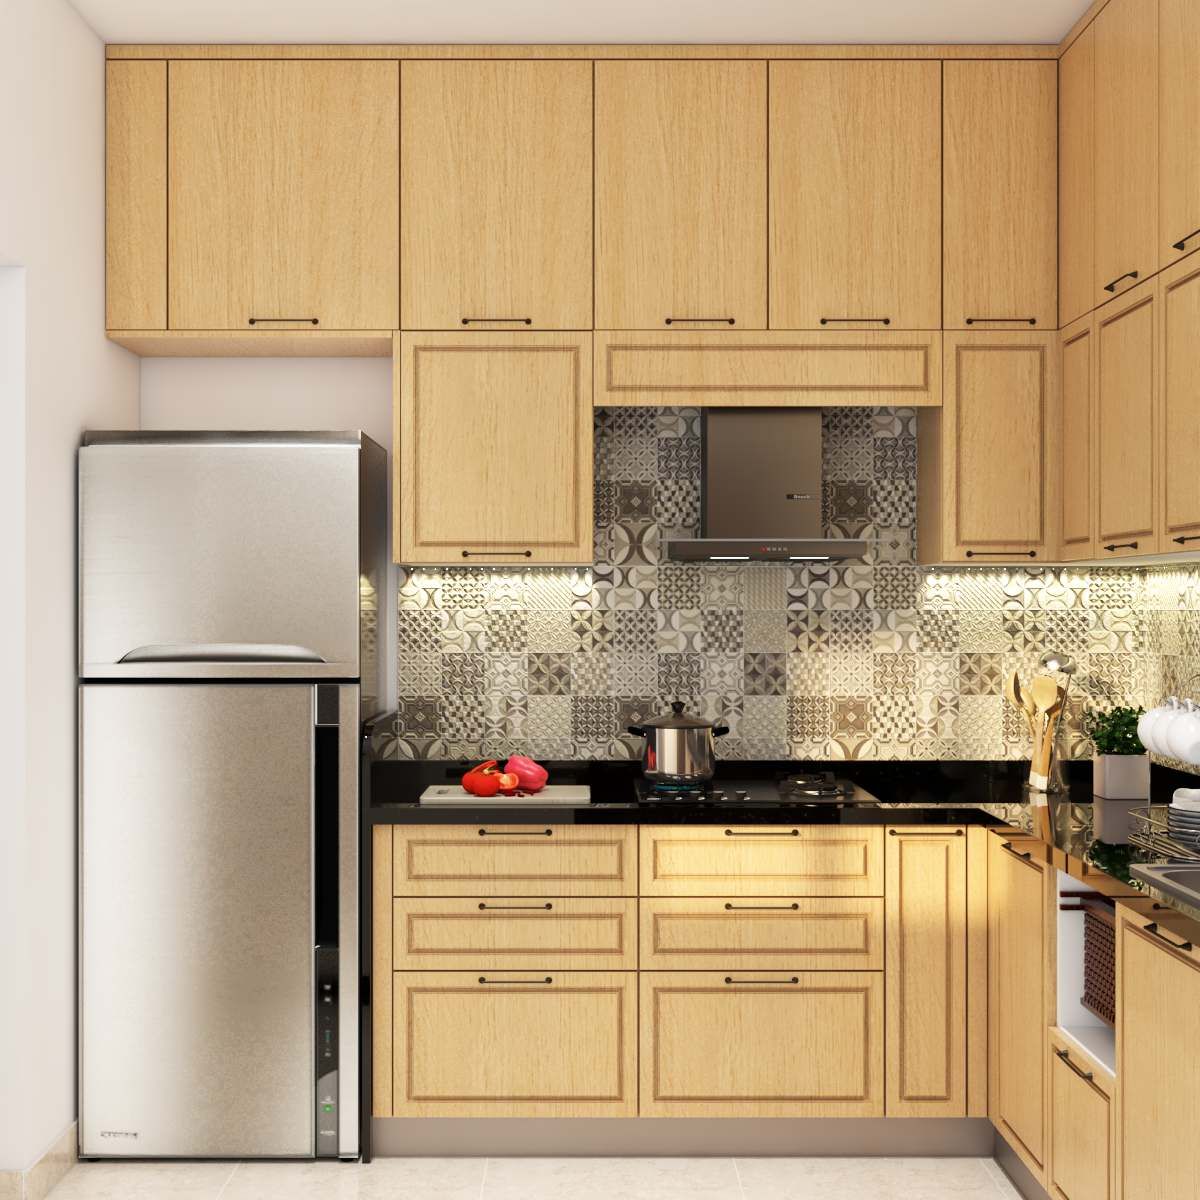 Modern L-Shaped Kitchen Design With Modular Wooden Cabinets